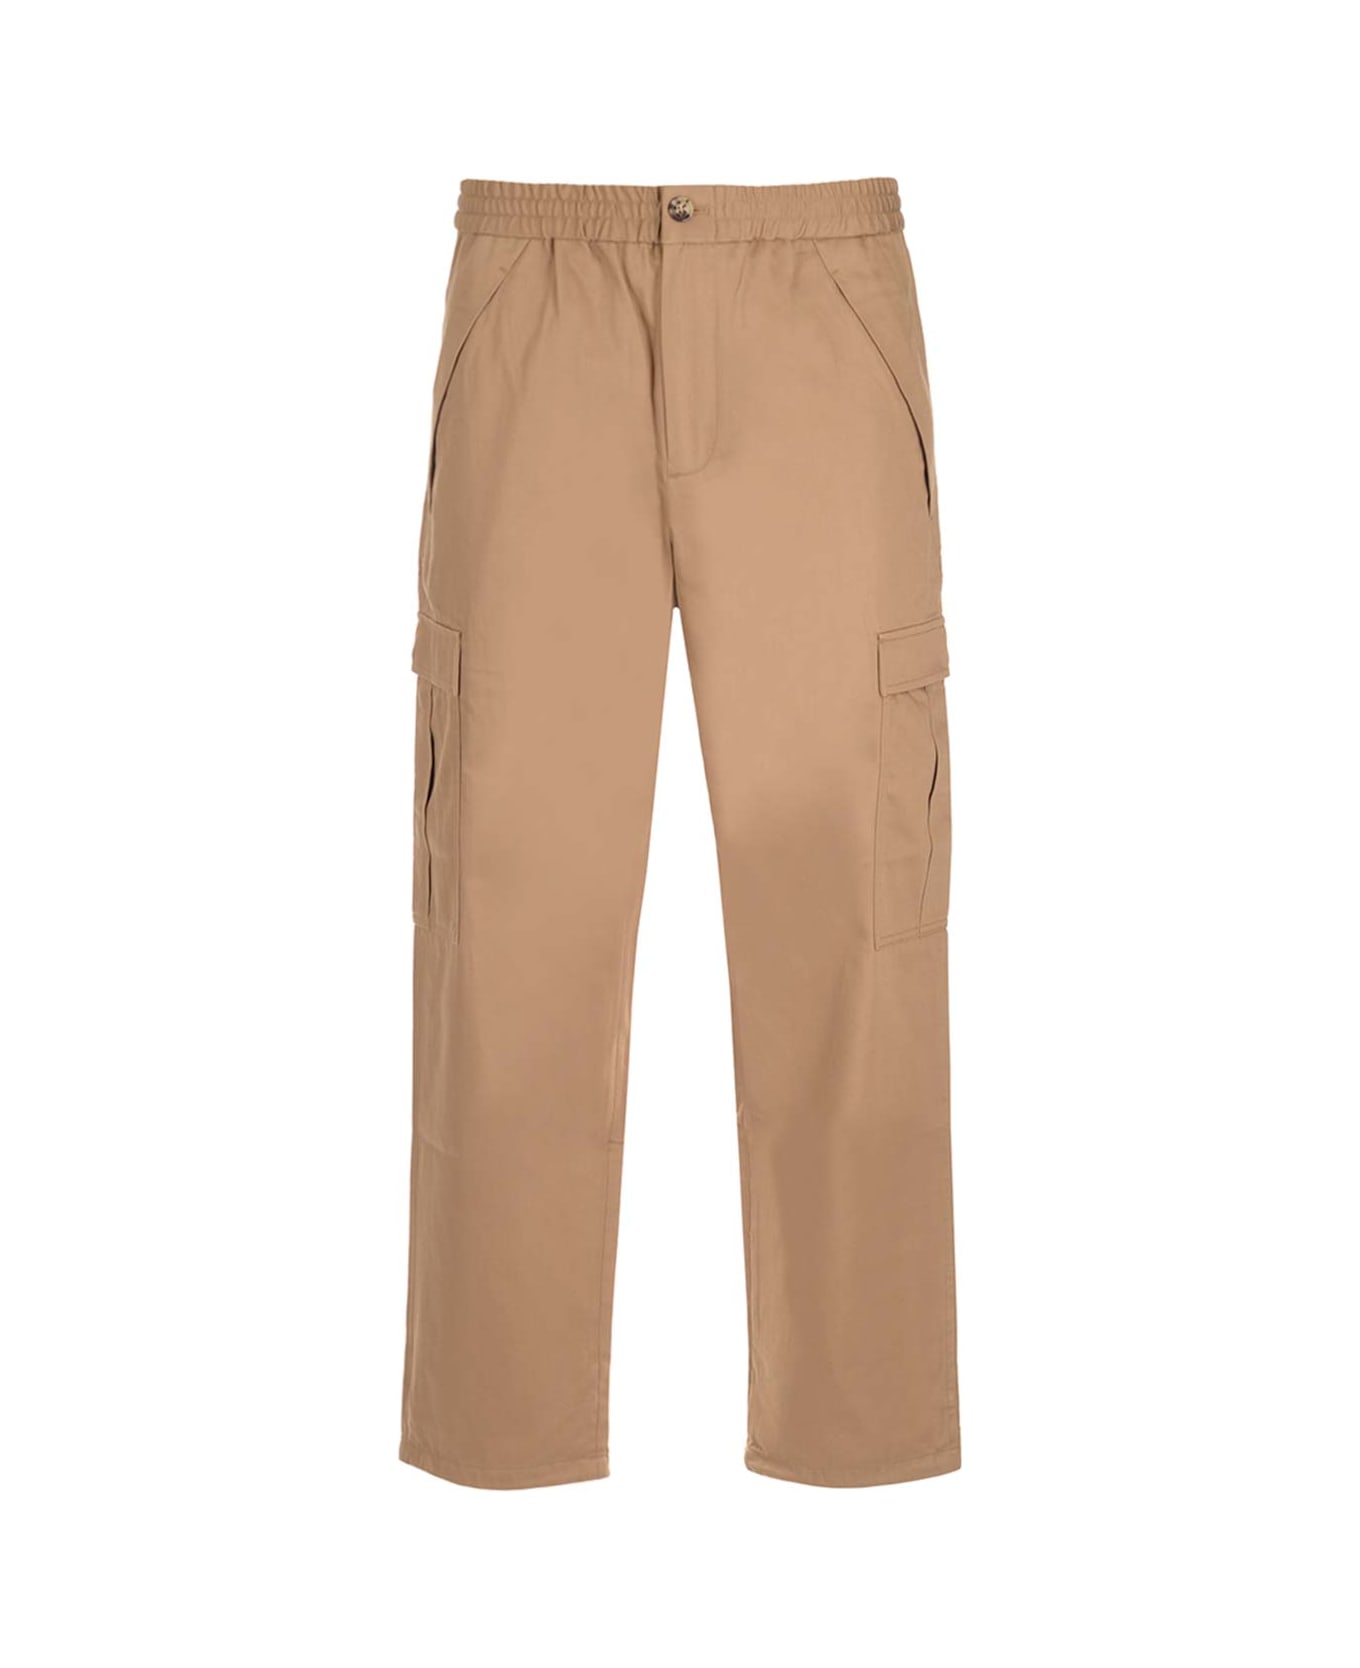 Burberry Camel Cotton Cargo Trousers - Brown ボトムス